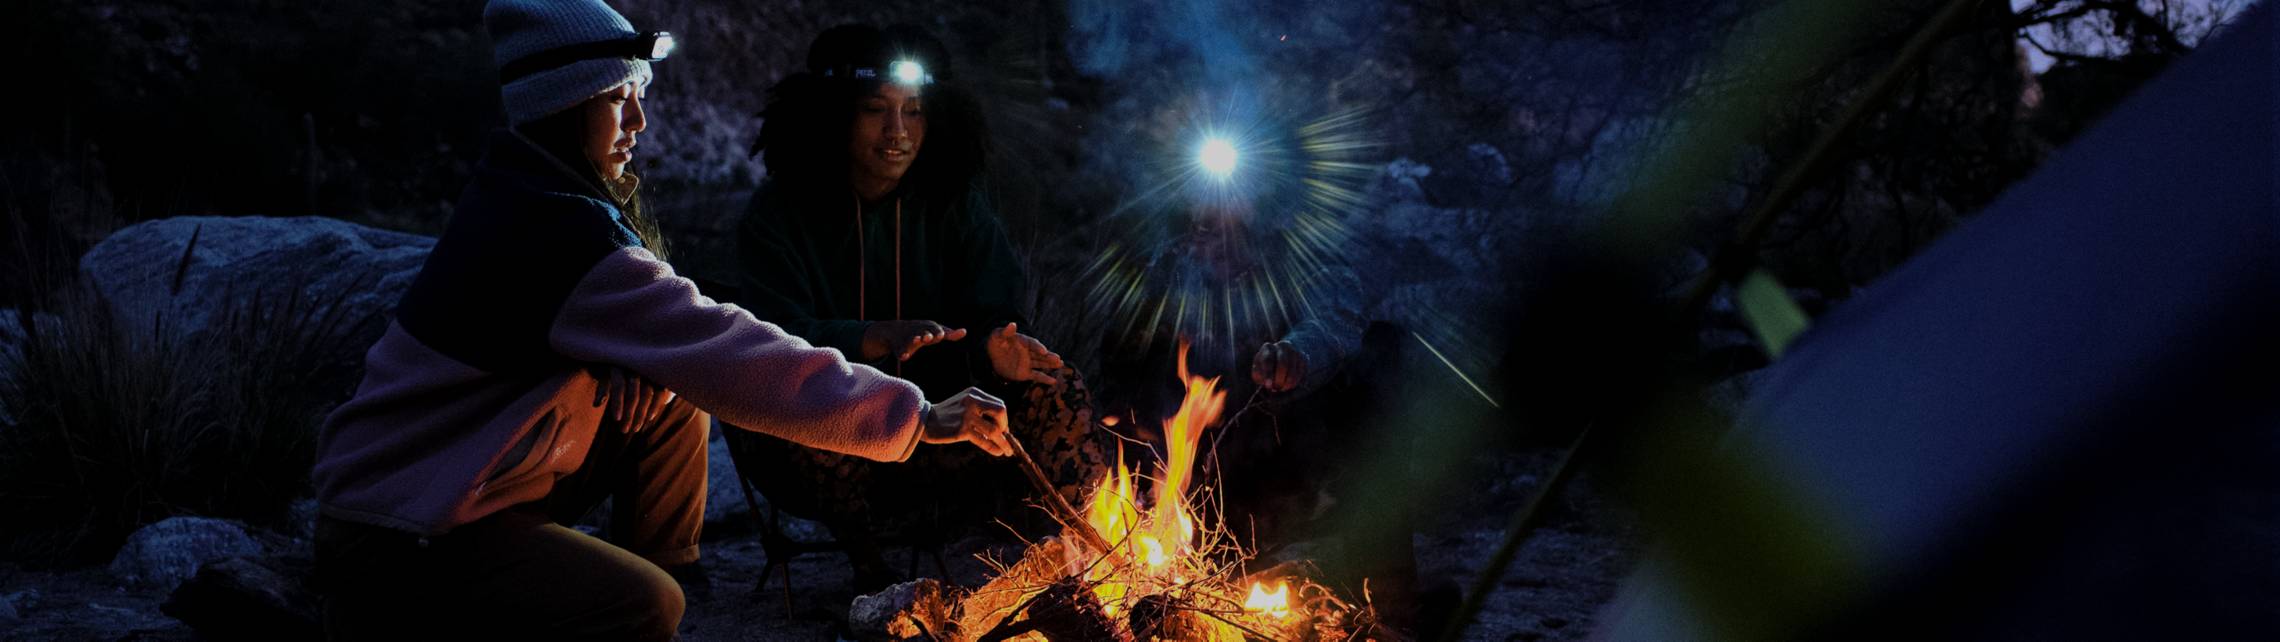 Two women wearing headlamps dispersing light tend to a campfire at night.